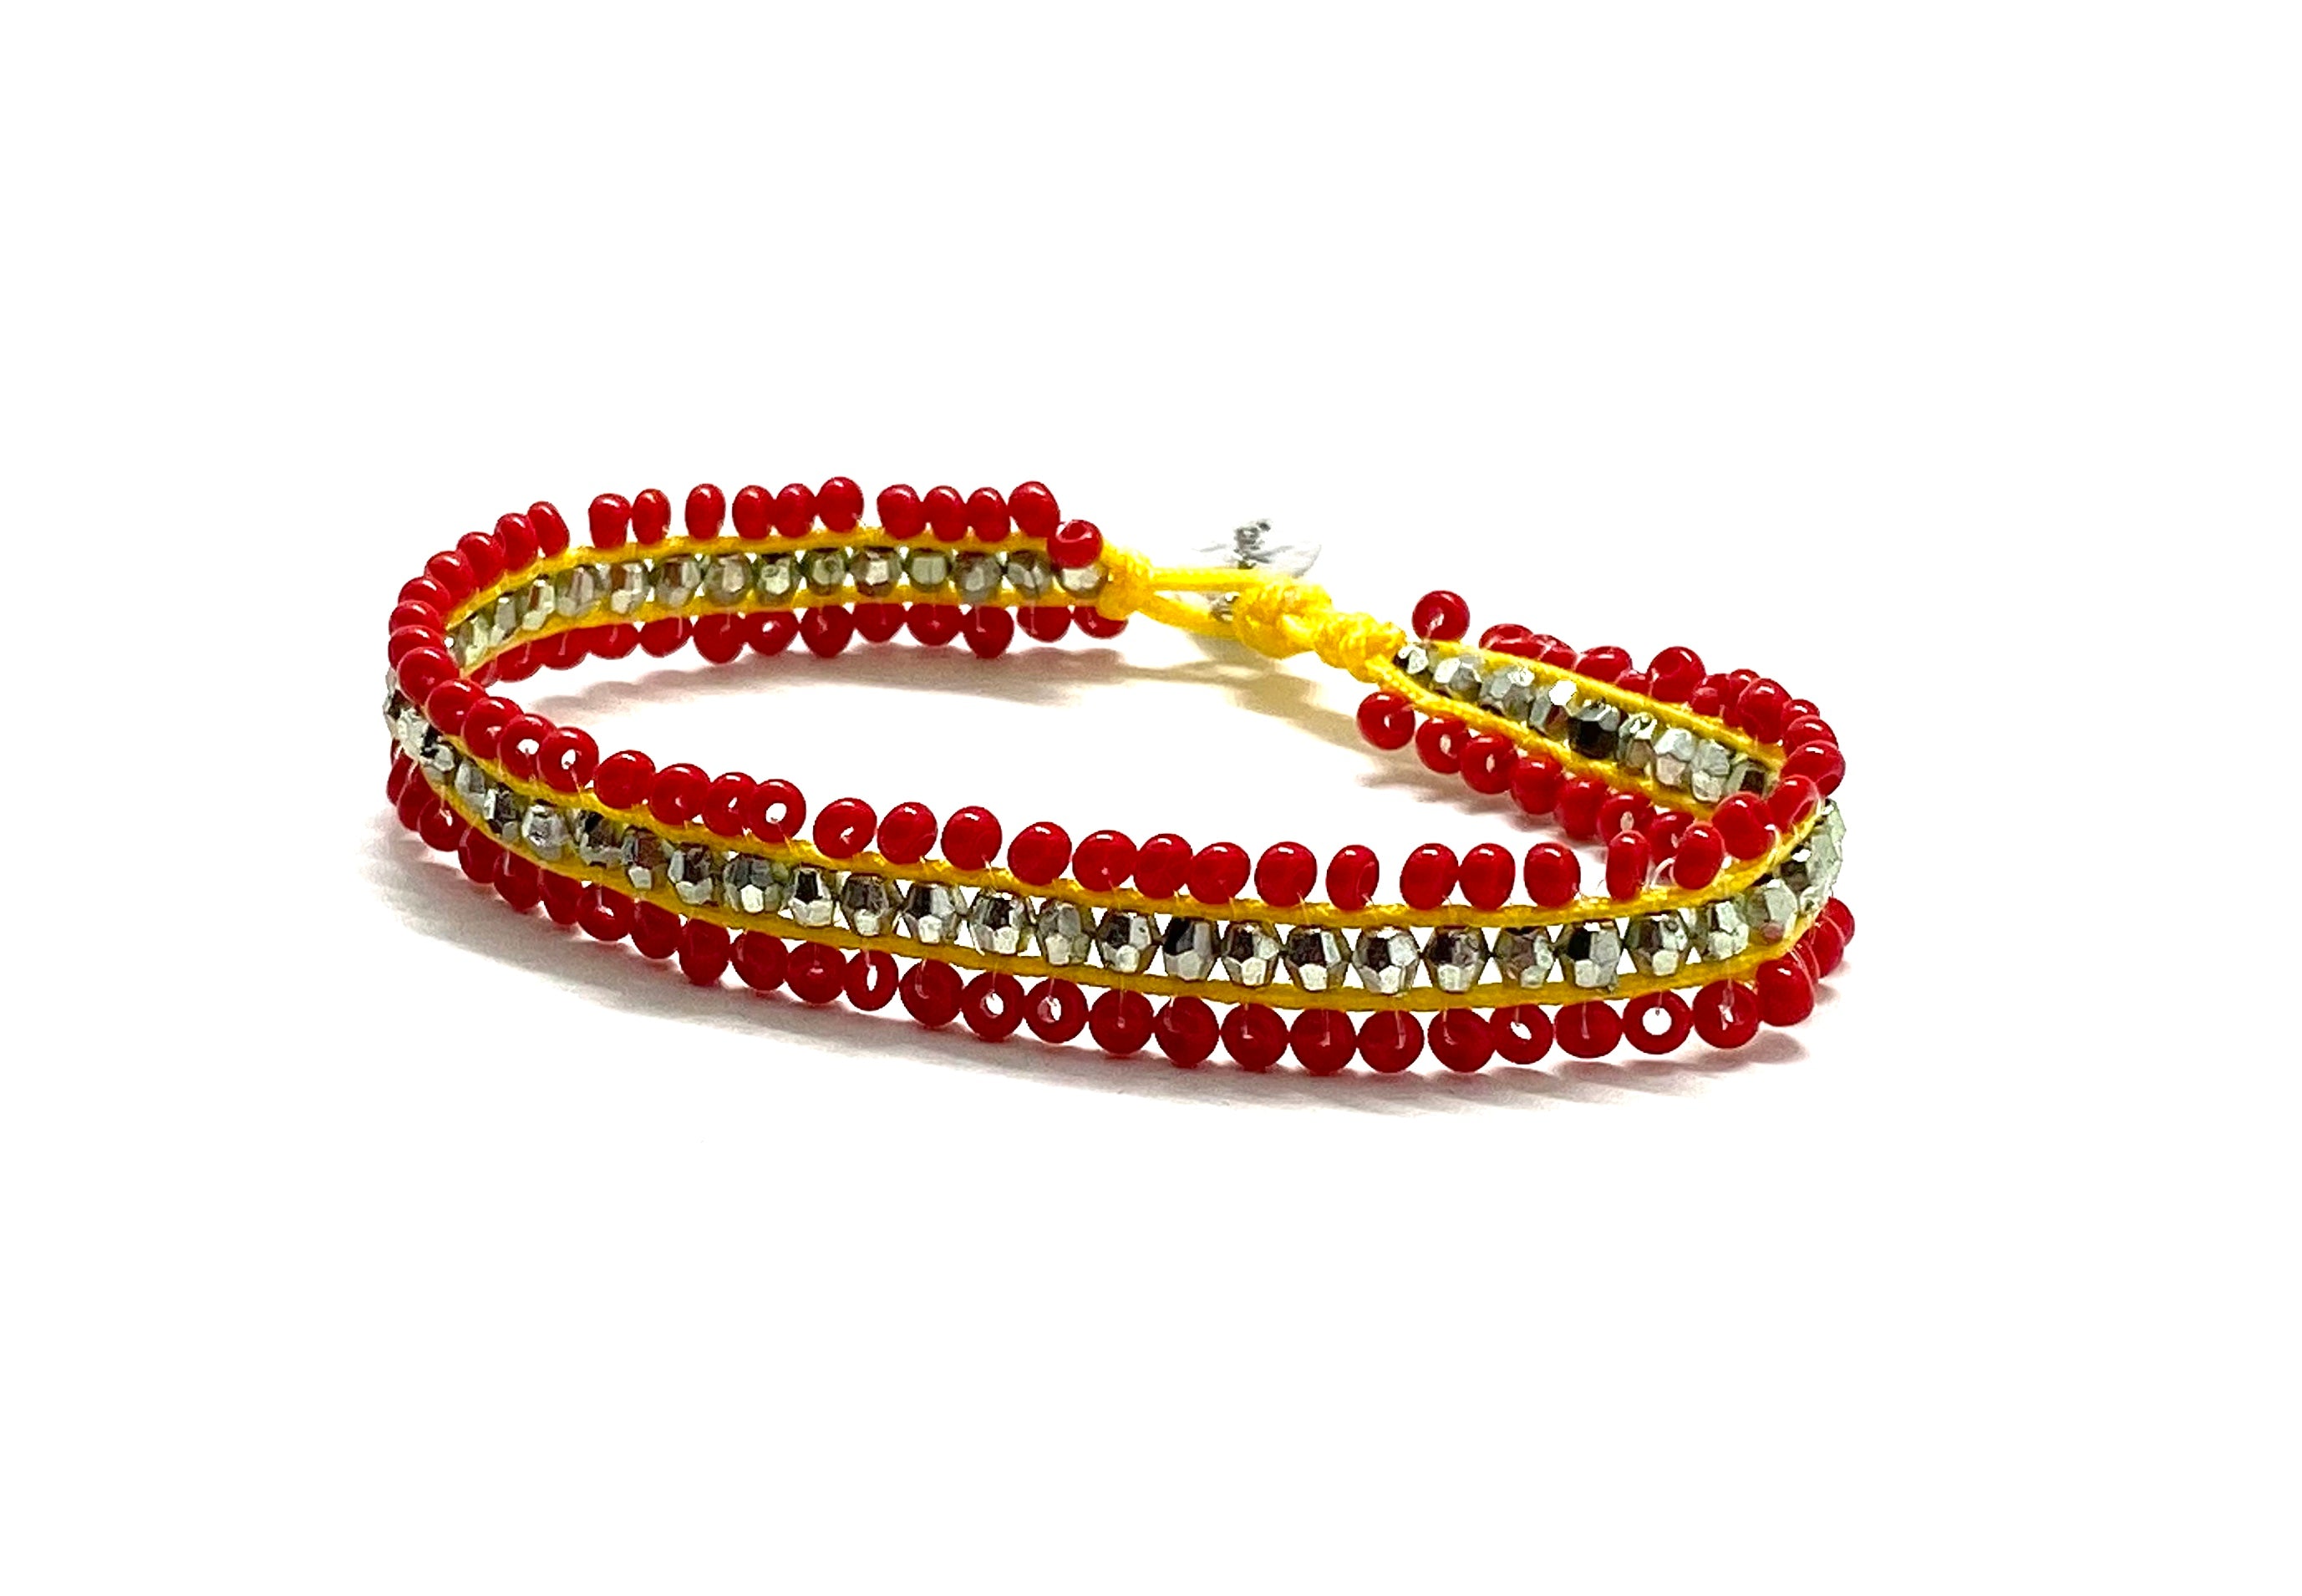 Beaded bracelet, red and light metallic green sequence